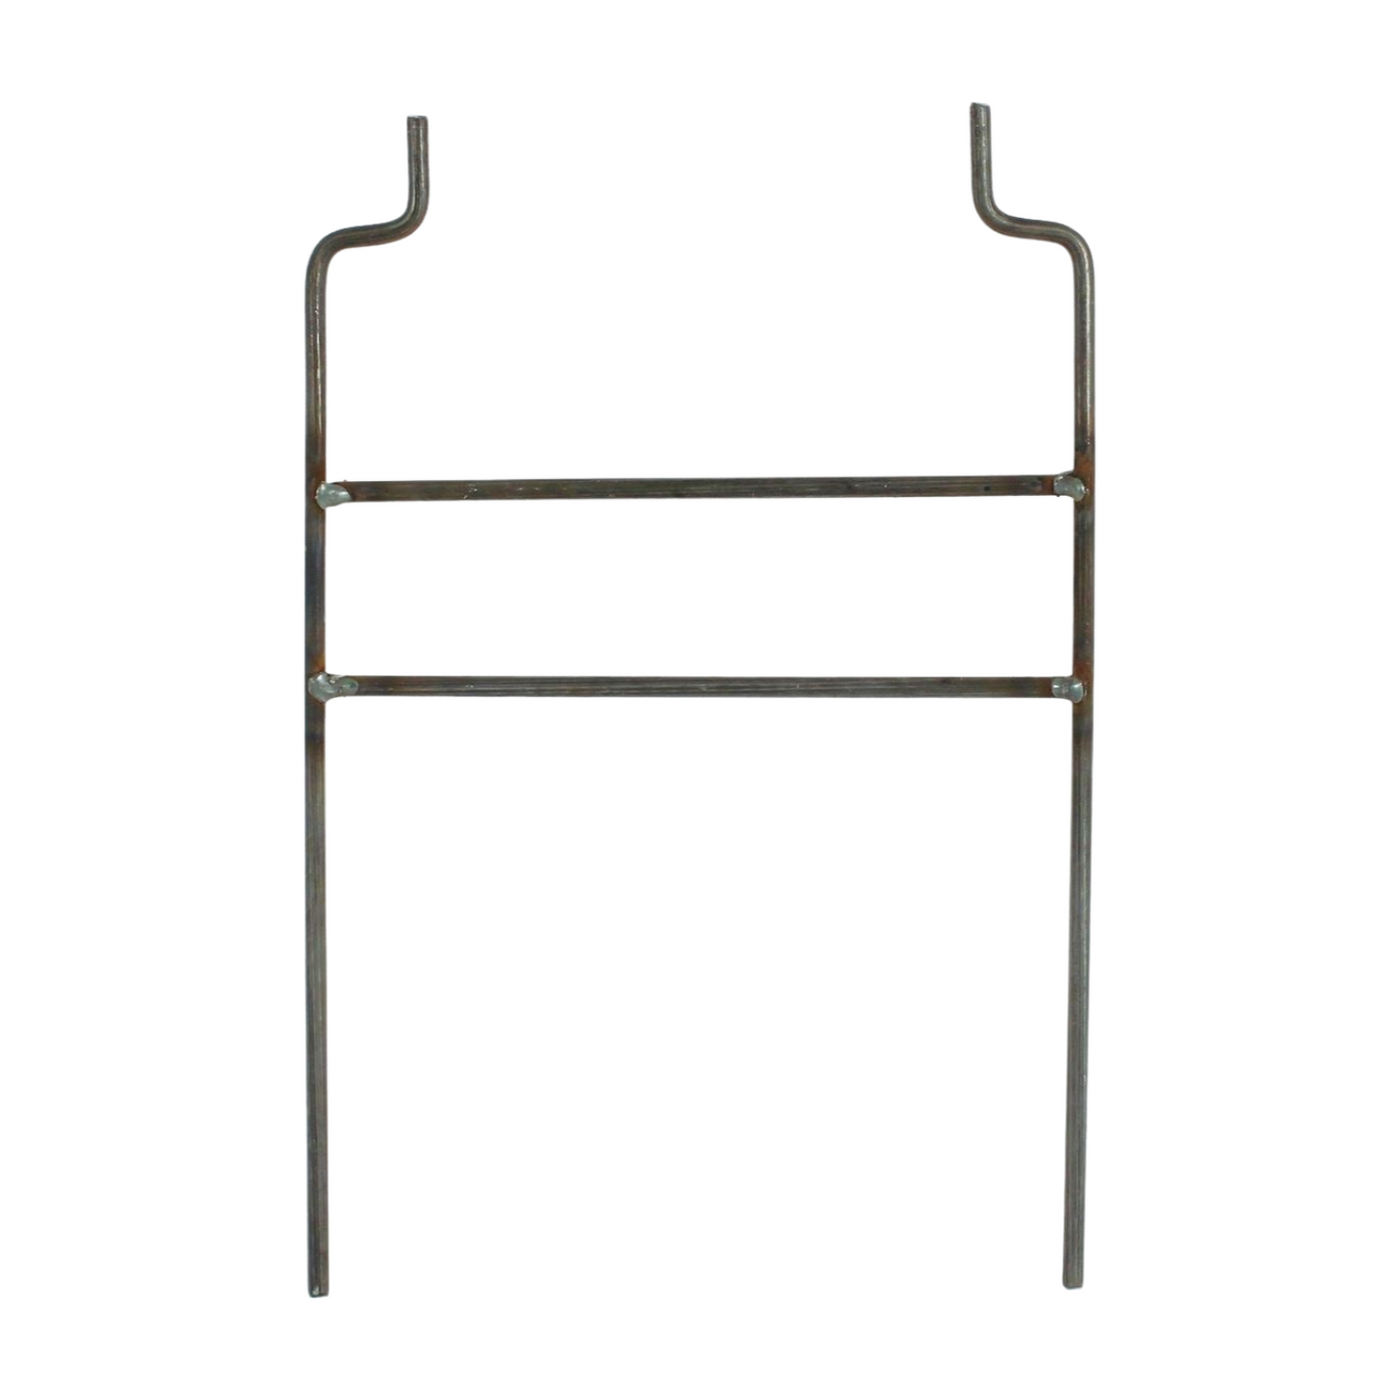 MB-220-H 13" Support Stands